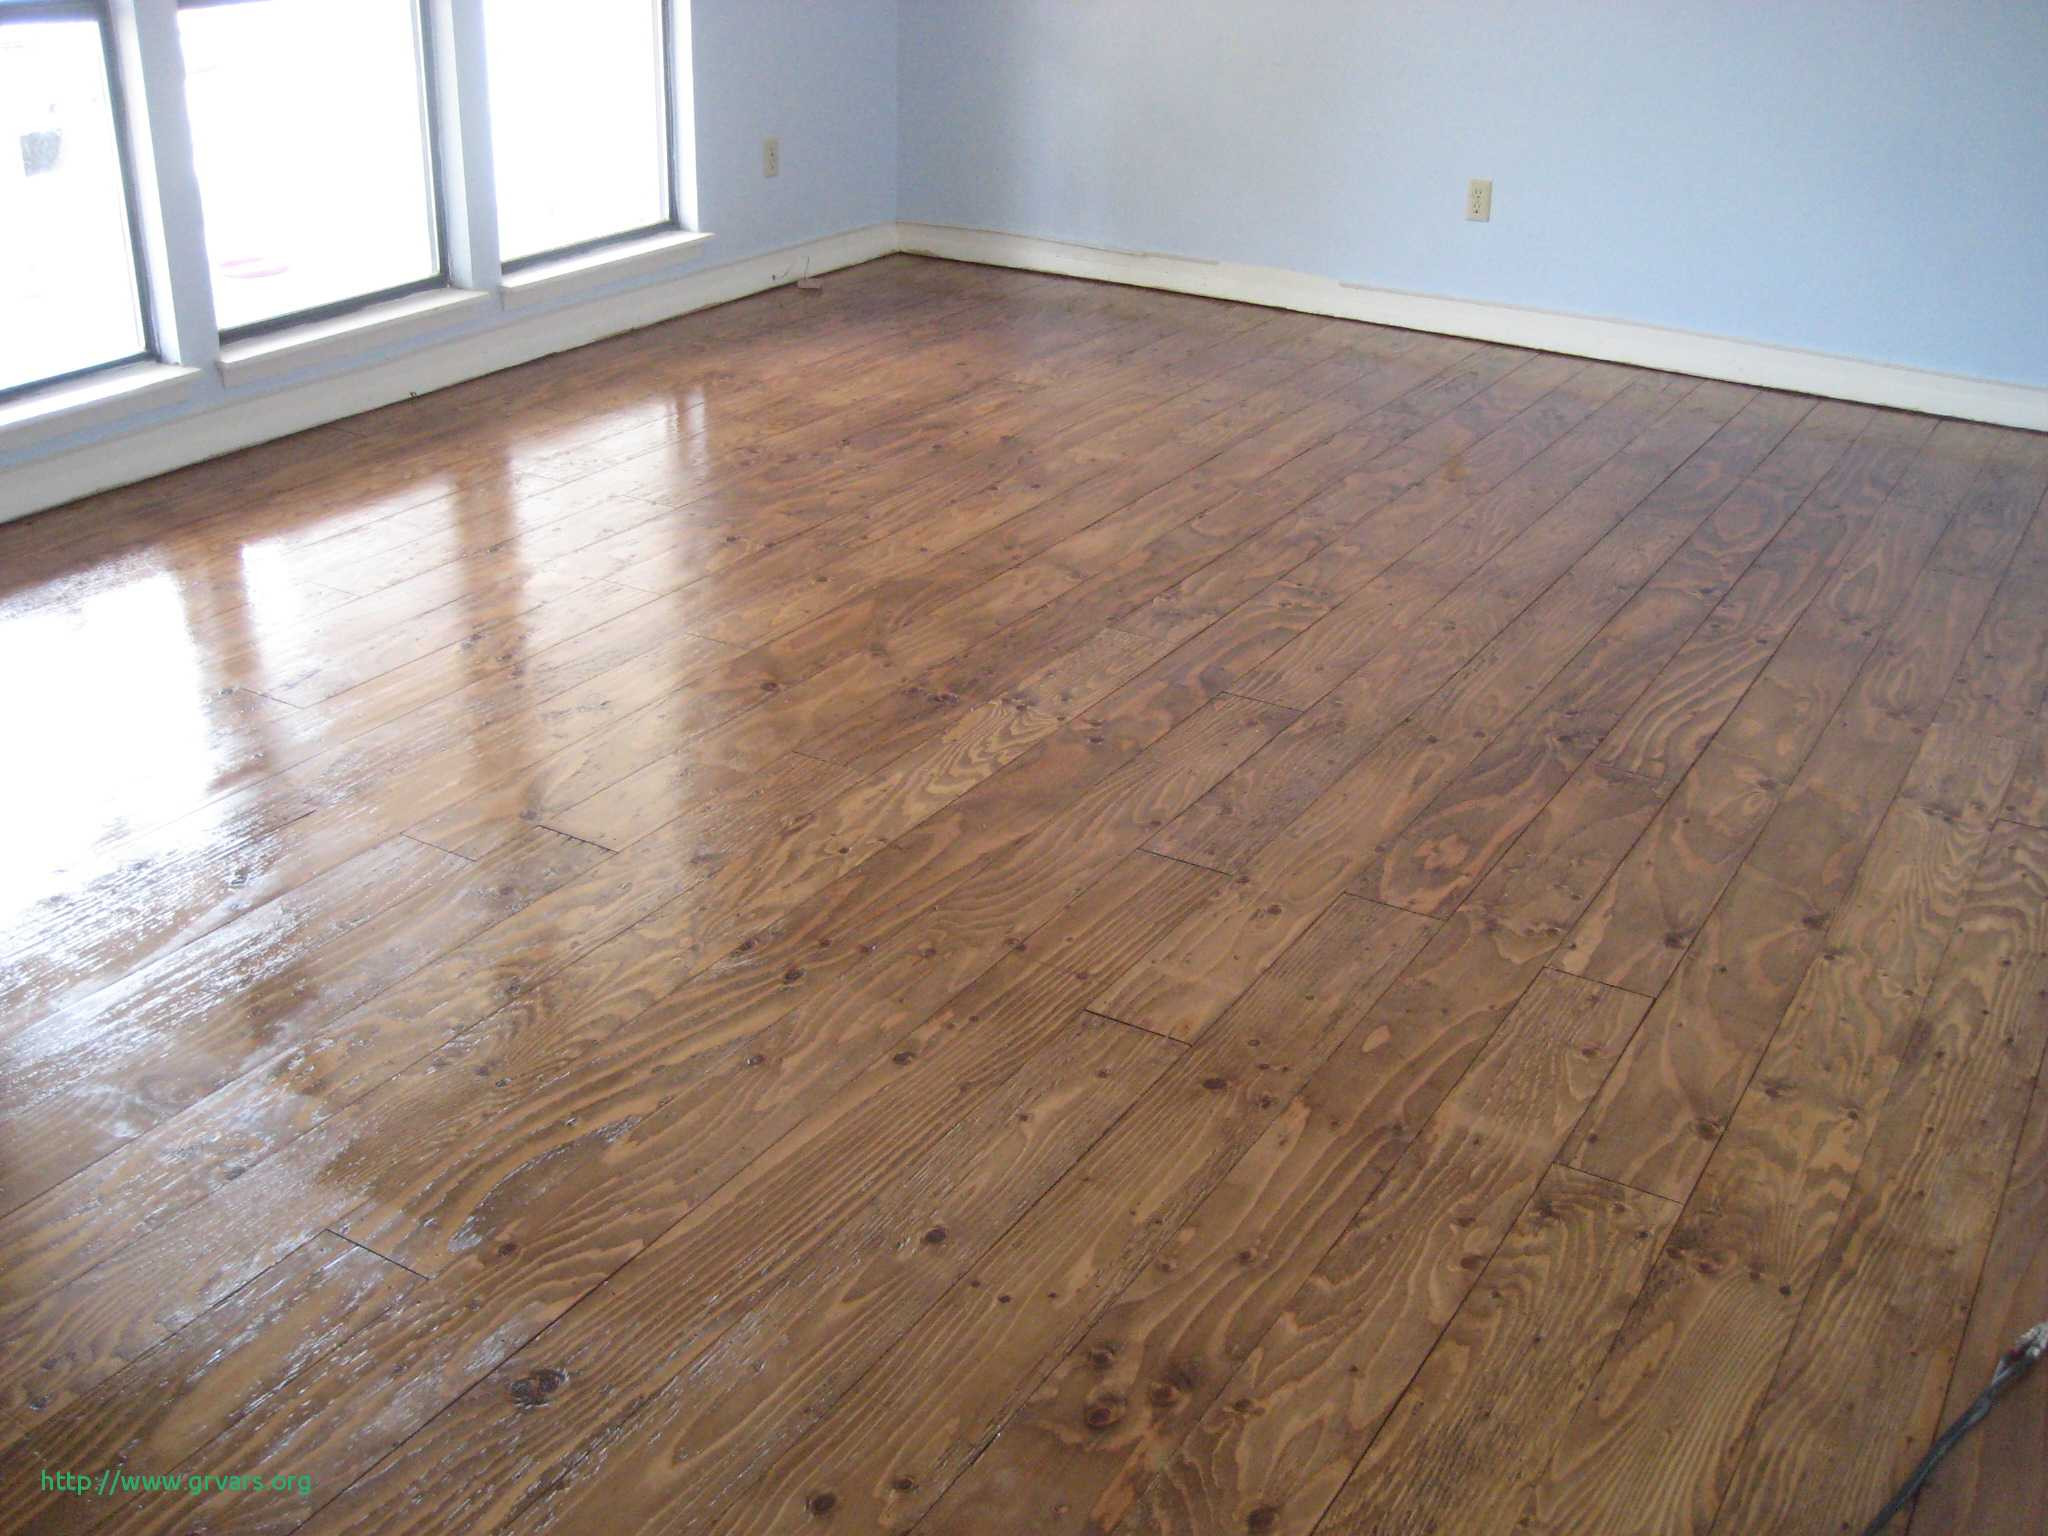 28 Recommended Pictures Of Hardwood Floors with White Trim 2024 free download pictures of hardwood floors with white trim of 20 luxe how to get paint off of hardwood floors ideas blog throughout how to get paint off of hardwood floors charmant marvelloust wood floors 